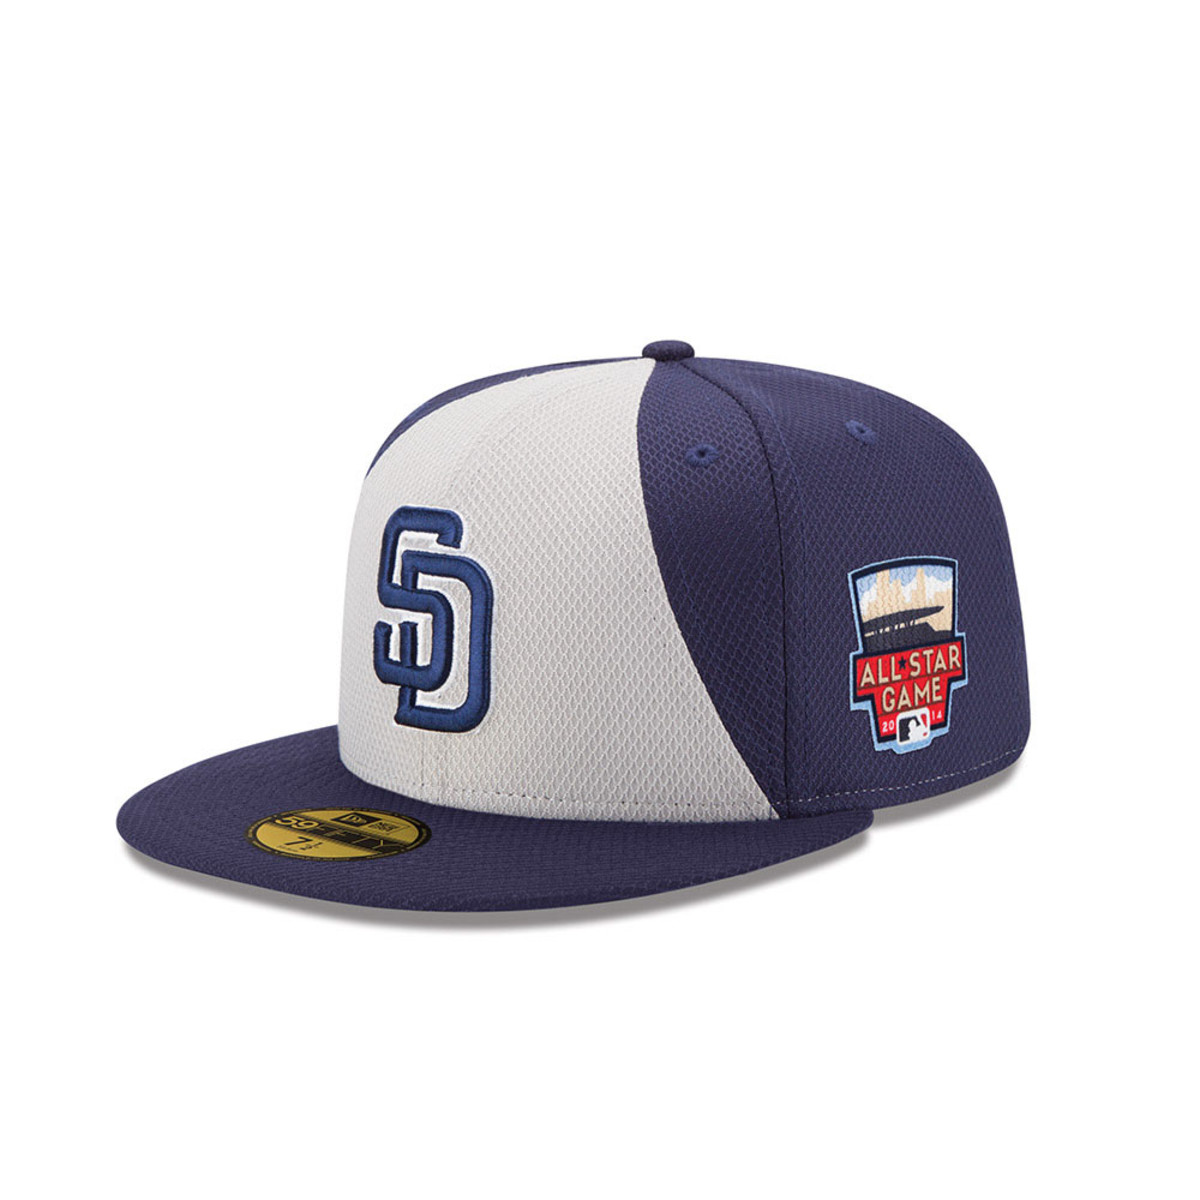 11068182_59FIFTY_ASG14ONFIELD_SADPAD_PATCH_SIZESTICKER_3QL_0.jpg